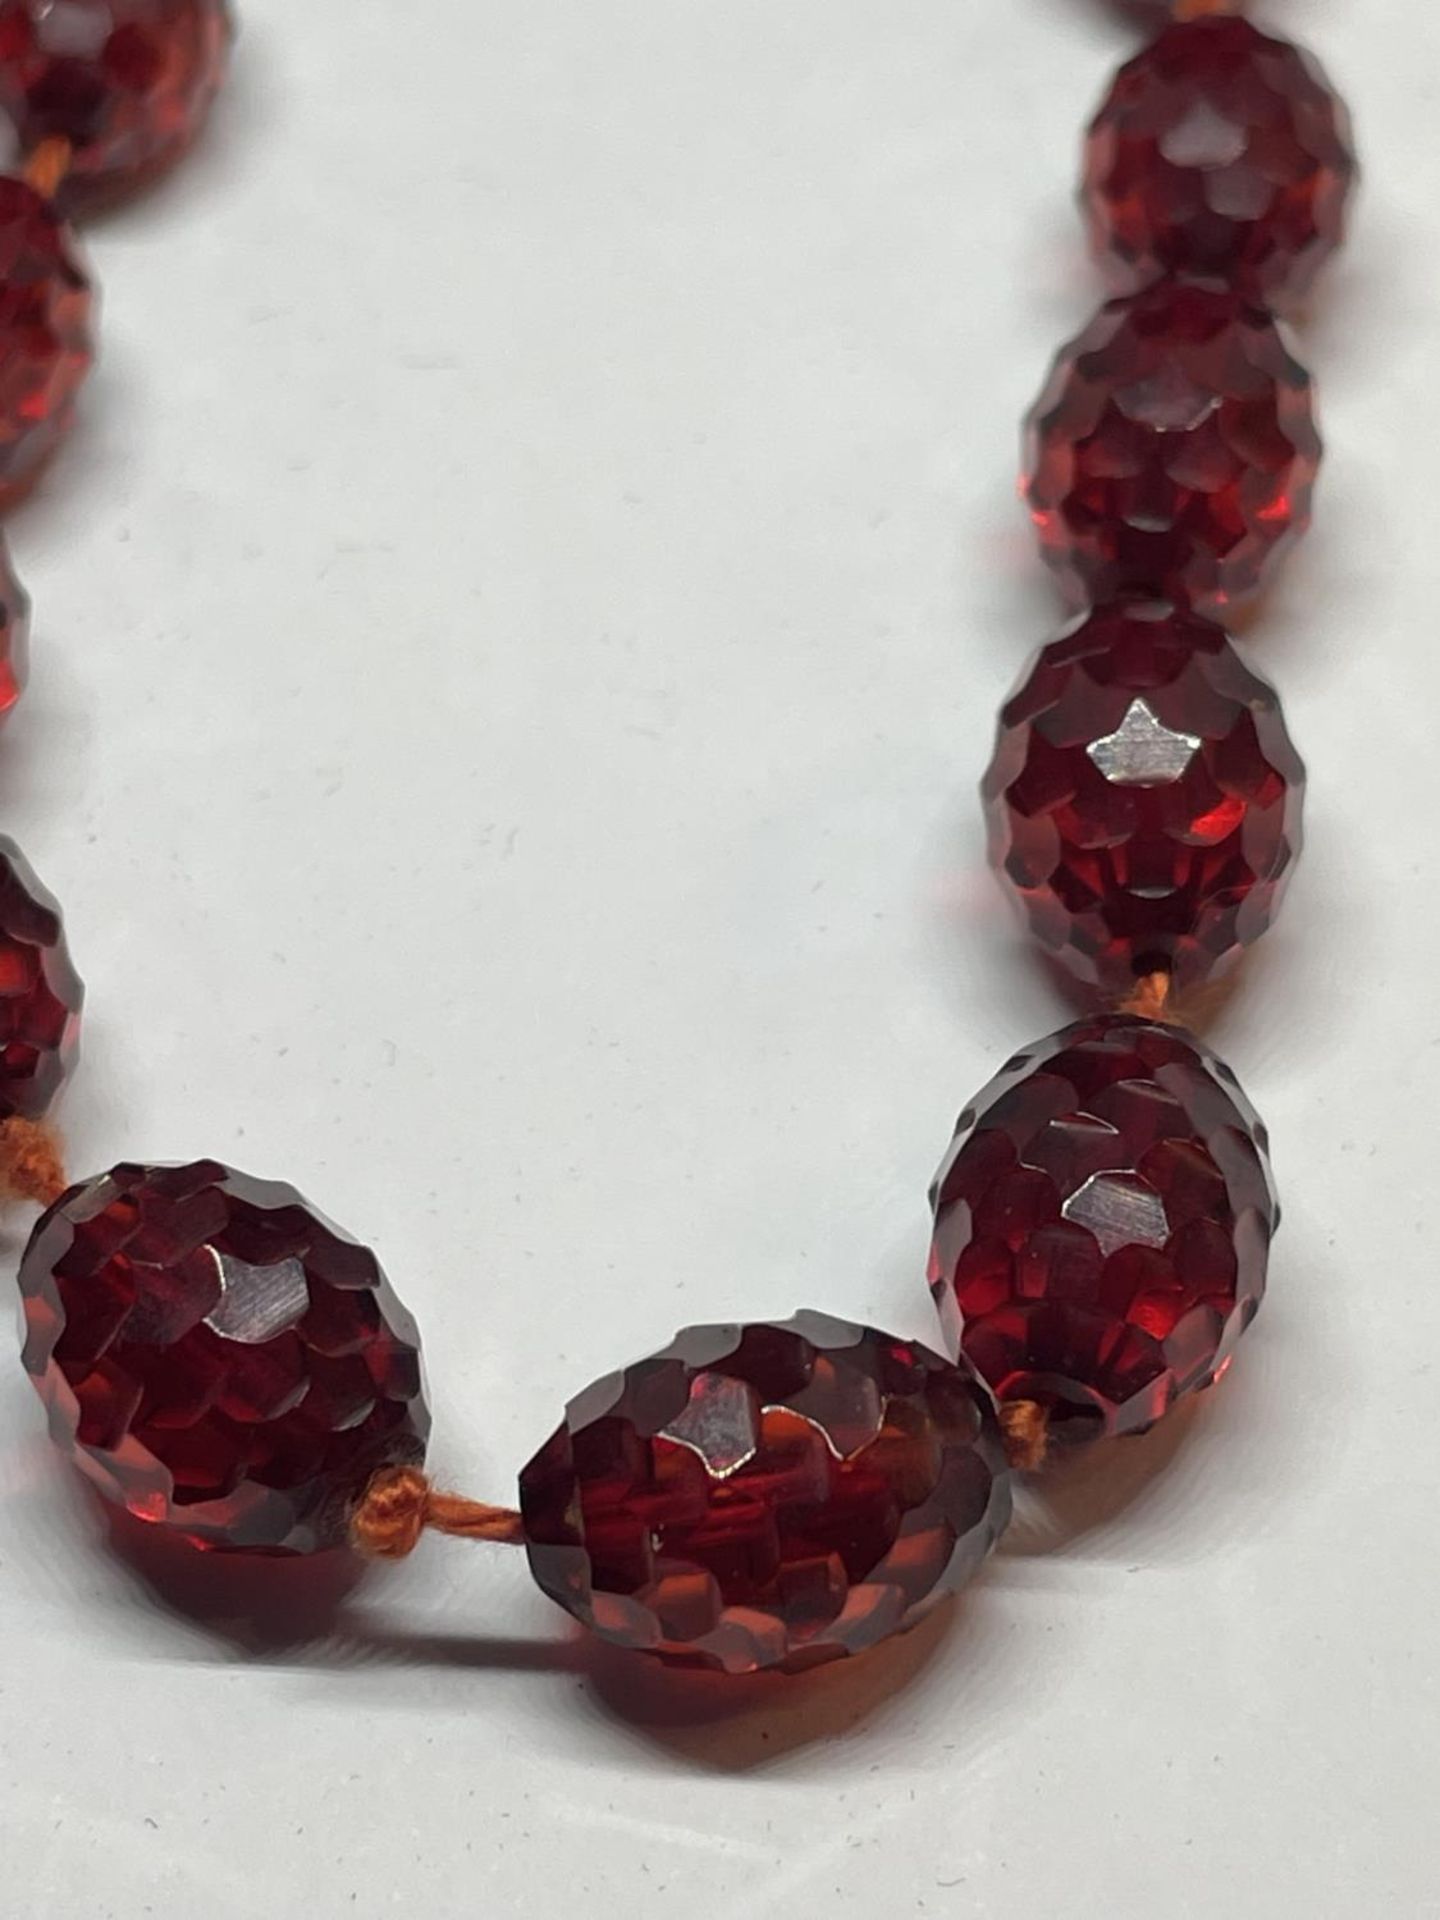 AN AMBER EFFECT BEADED NECKLACE WITH TWENTY THREE BEADS AND TWO FASTNER BEADS - Image 2 of 3